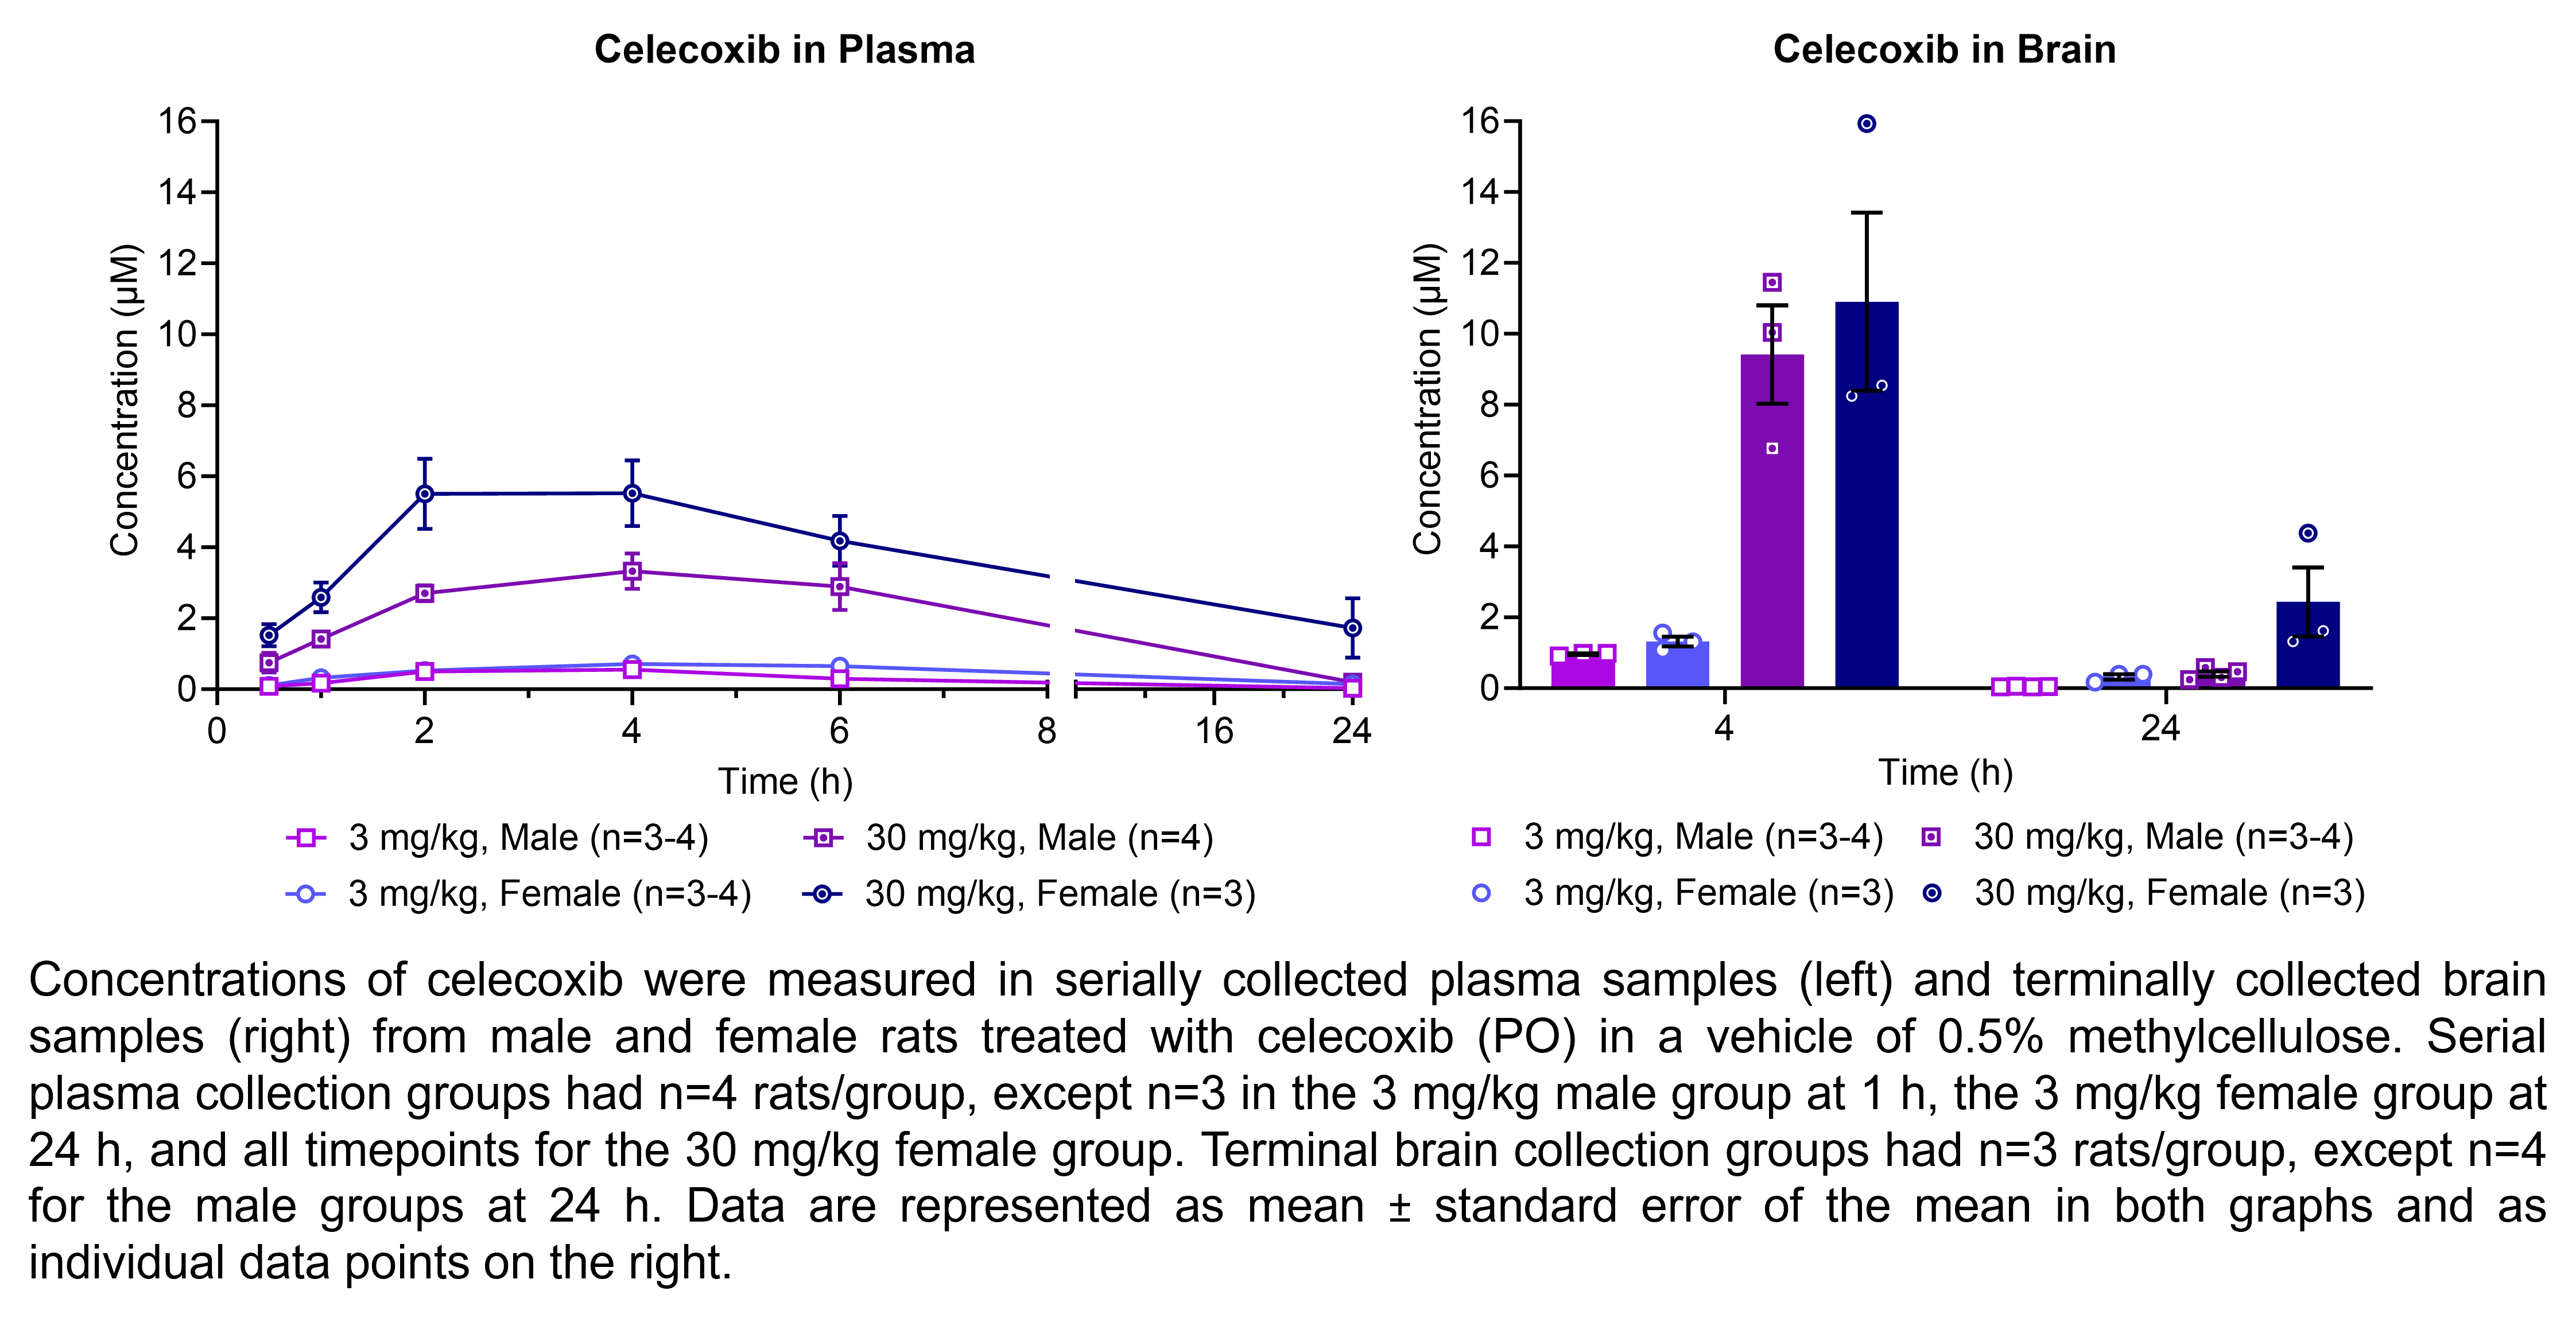 Celecoxib concentrations were measured in serially collected plasma samples and terminally collected brain samples (shown on two graphs) from males and females treated with 3 or 30 mg/kg celecoxib (PO) in a vehicle of 0.5% methylcellulose. There were 4 rats/group for plasma and 3-4 rats/group for brain.